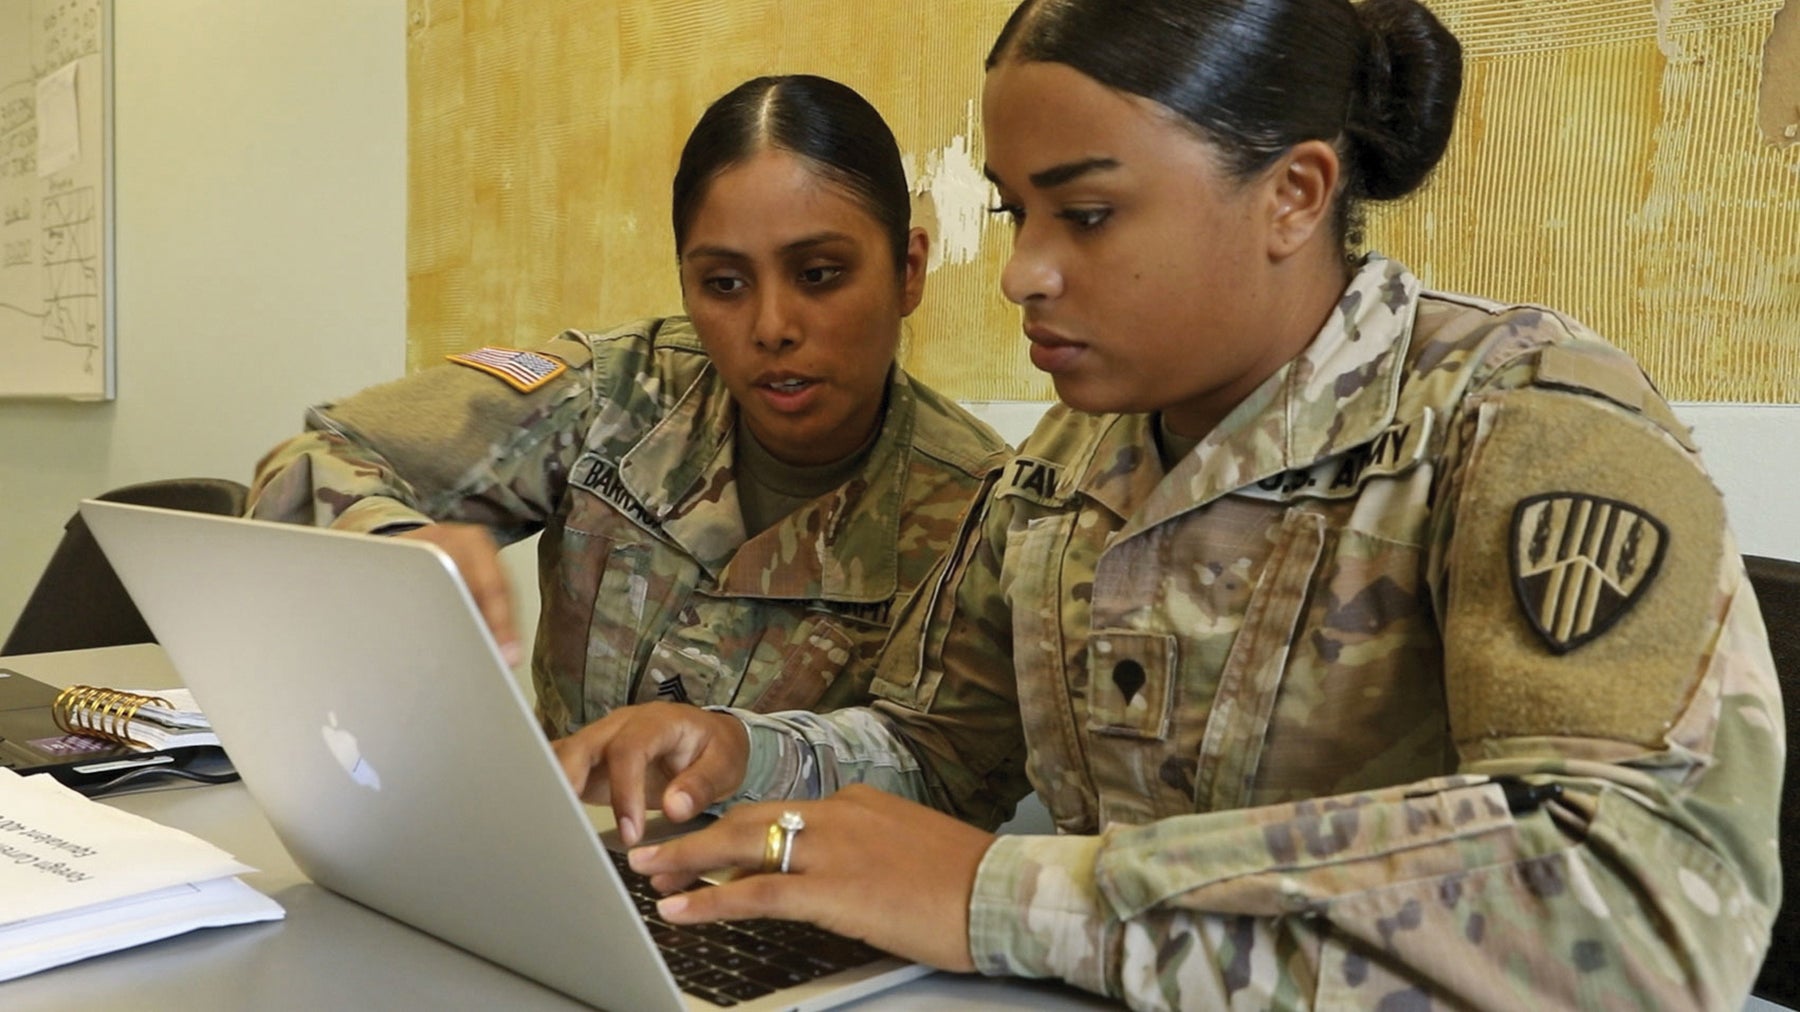 U.S. Army Reserve soldiers from the 369th Special Troops Battalion participate in an exercise for finance and comptroller troops at Joint Base McGuire-Dix-Lakehurst, New Jersey. (Credit: U.S. Army Reserve/Sgt. Zachary Johnson)